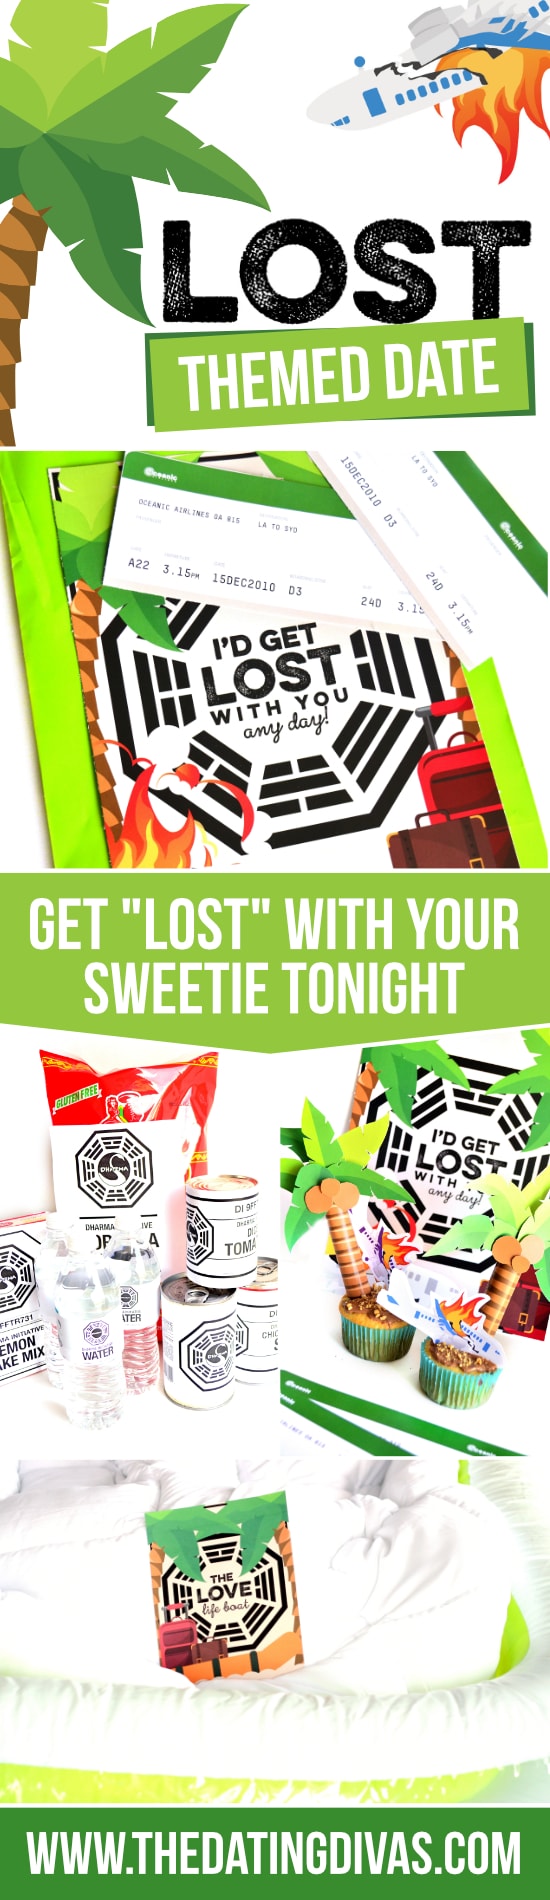 Get “LOST” With Your Sweetie